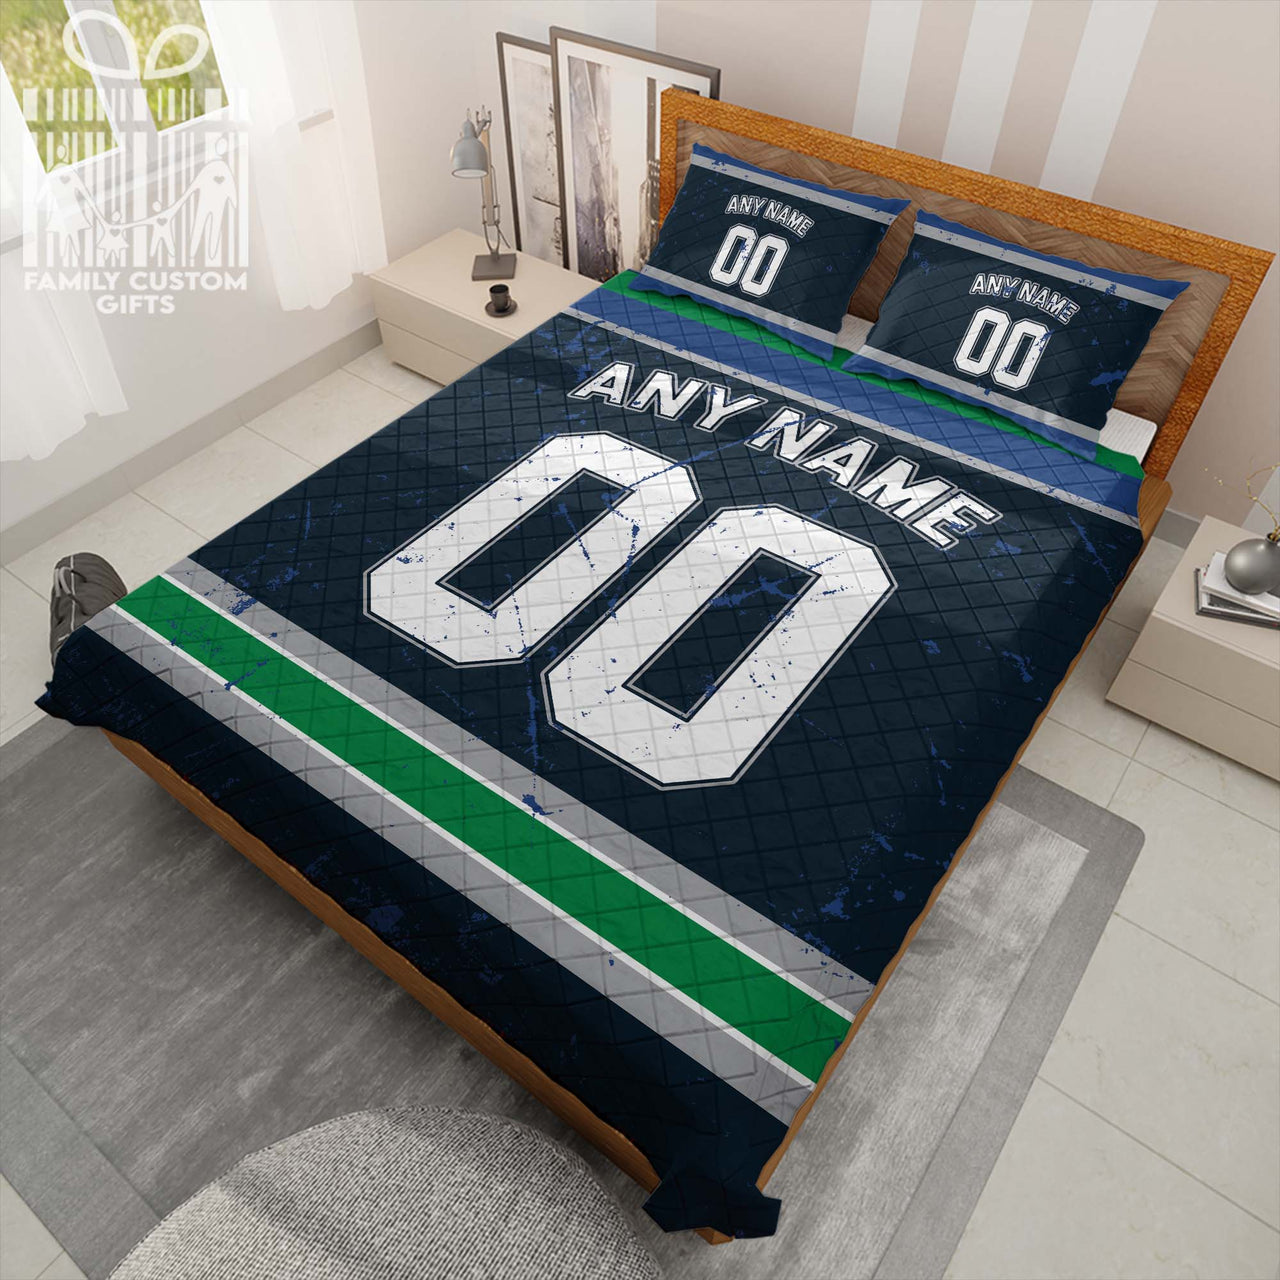 Custom Quilt Sets Vancouver Jersey Personalized Ice hockey Premium Quilt Bedding for Men Women